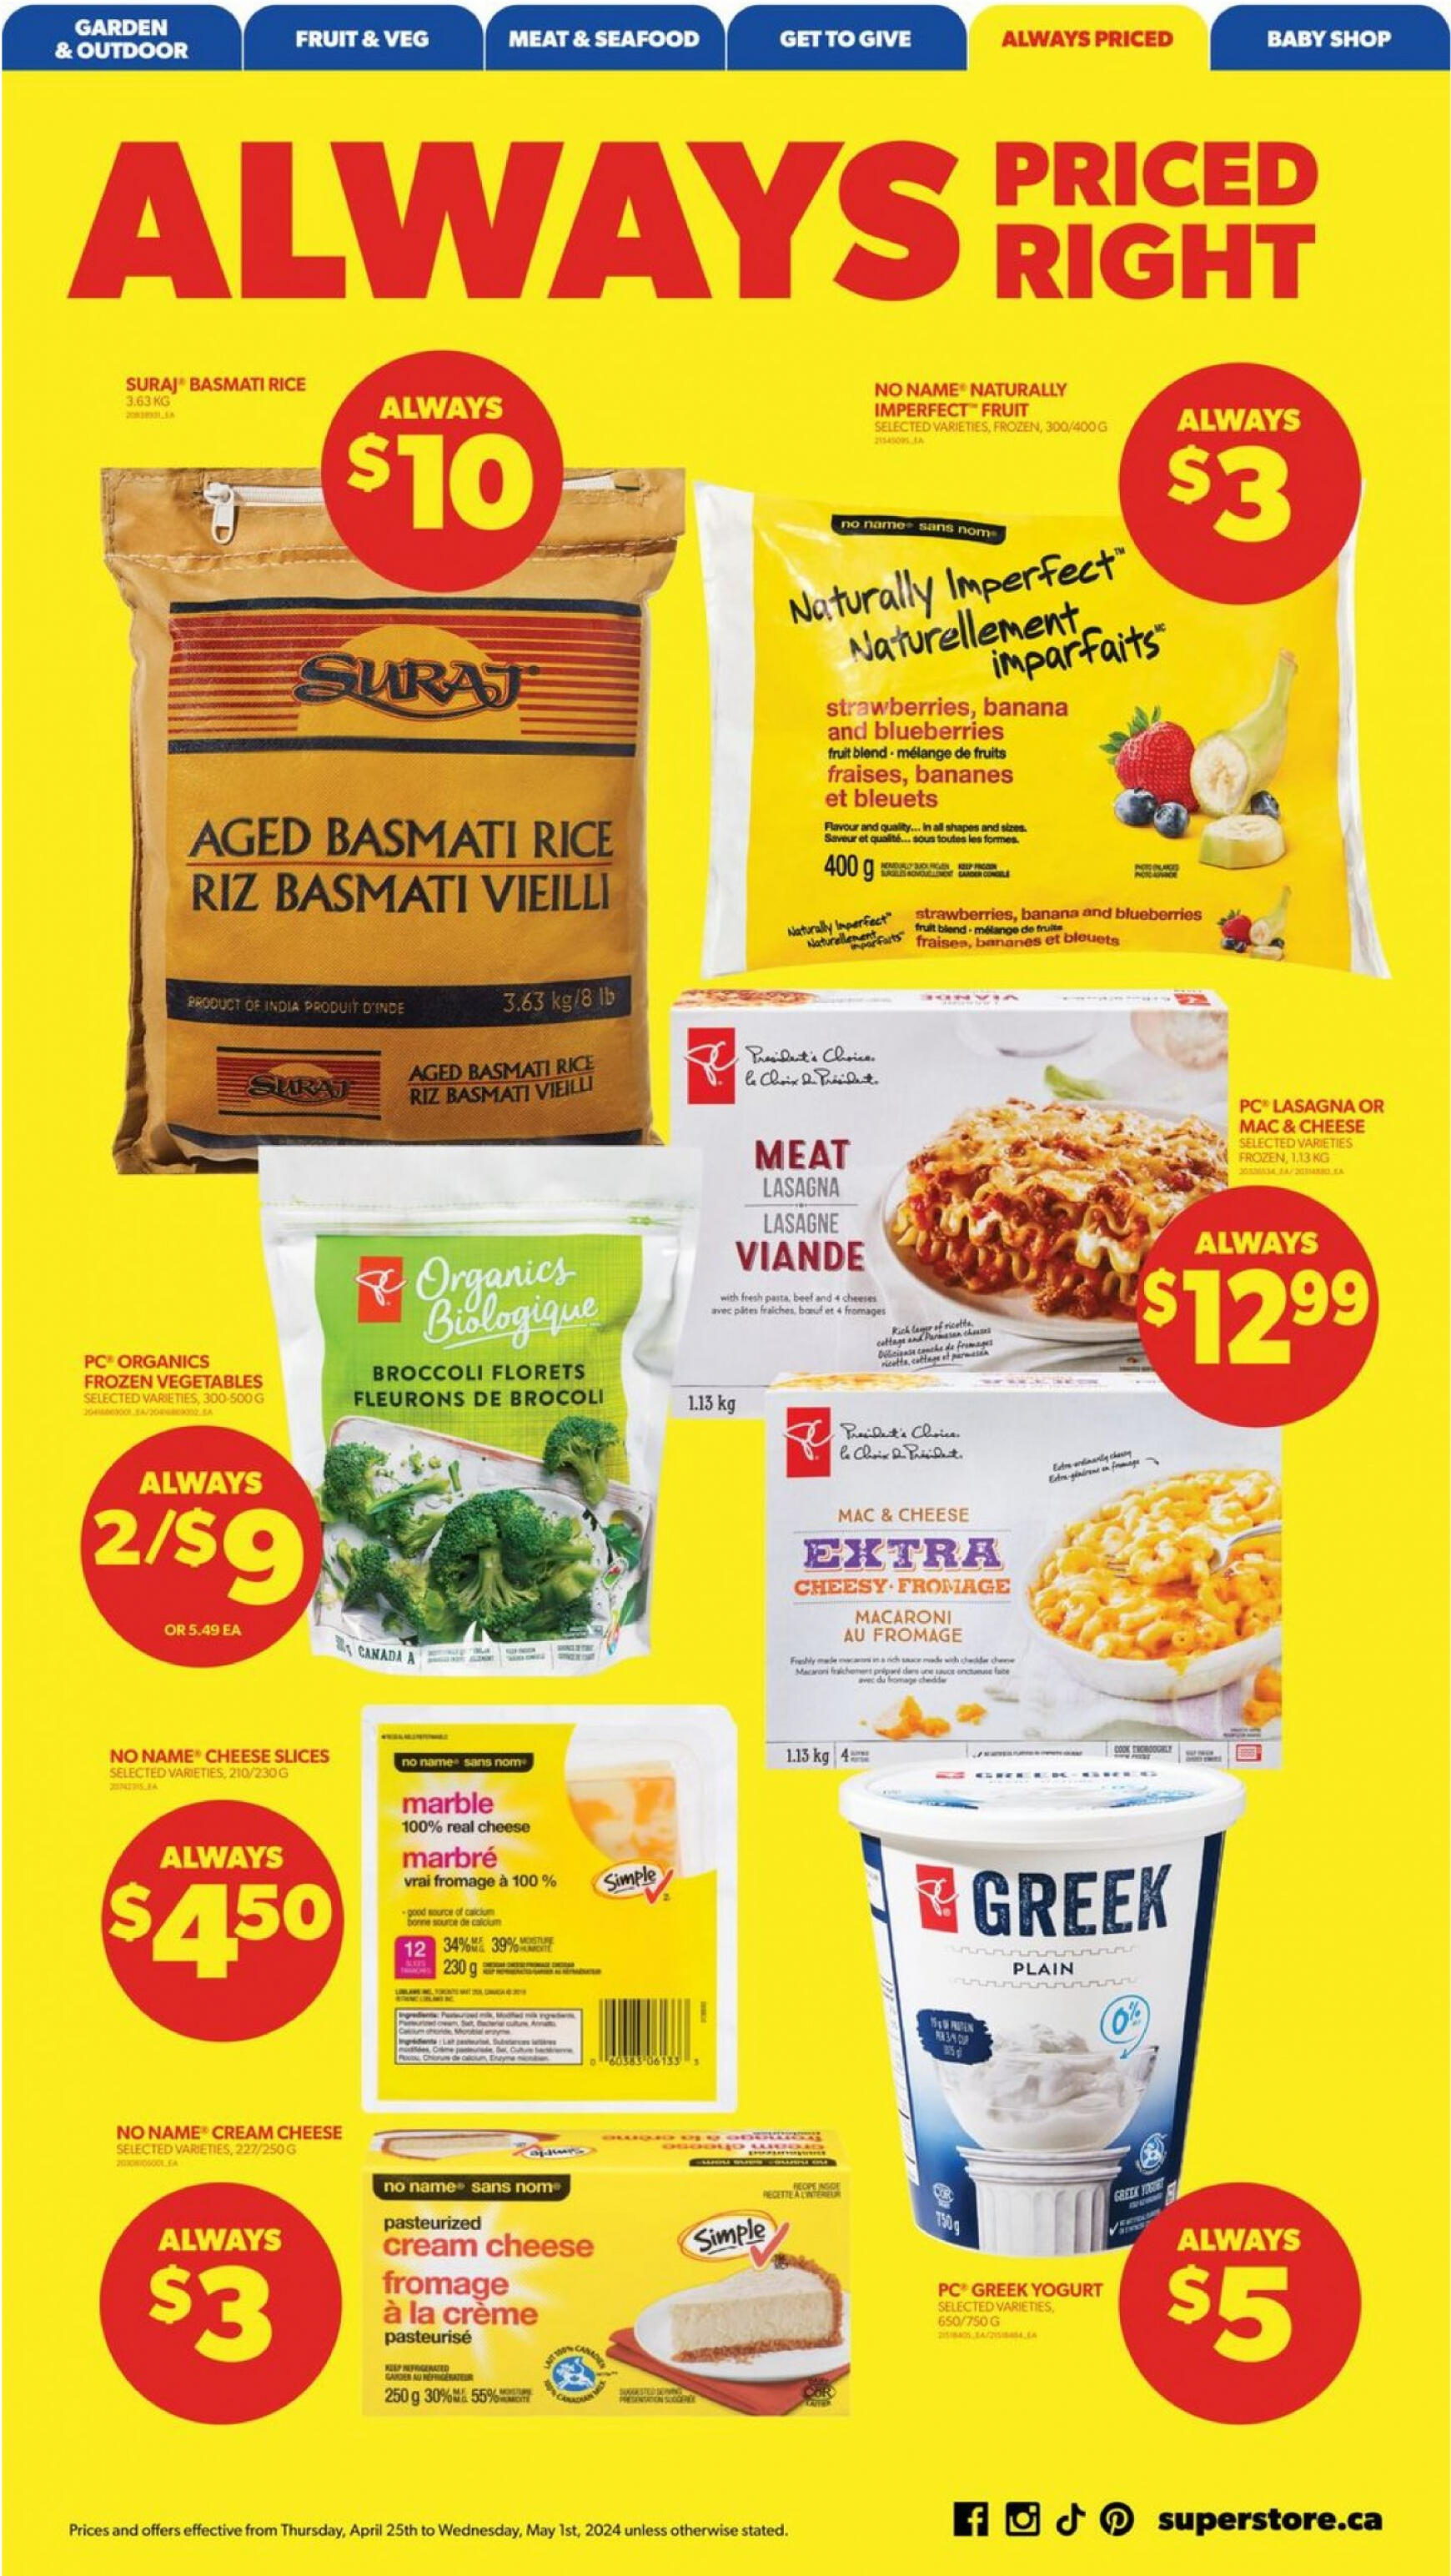 real-canadian-superstore - Real Canadian Superstore flyer current 01.05. - 31.05. - page: 16